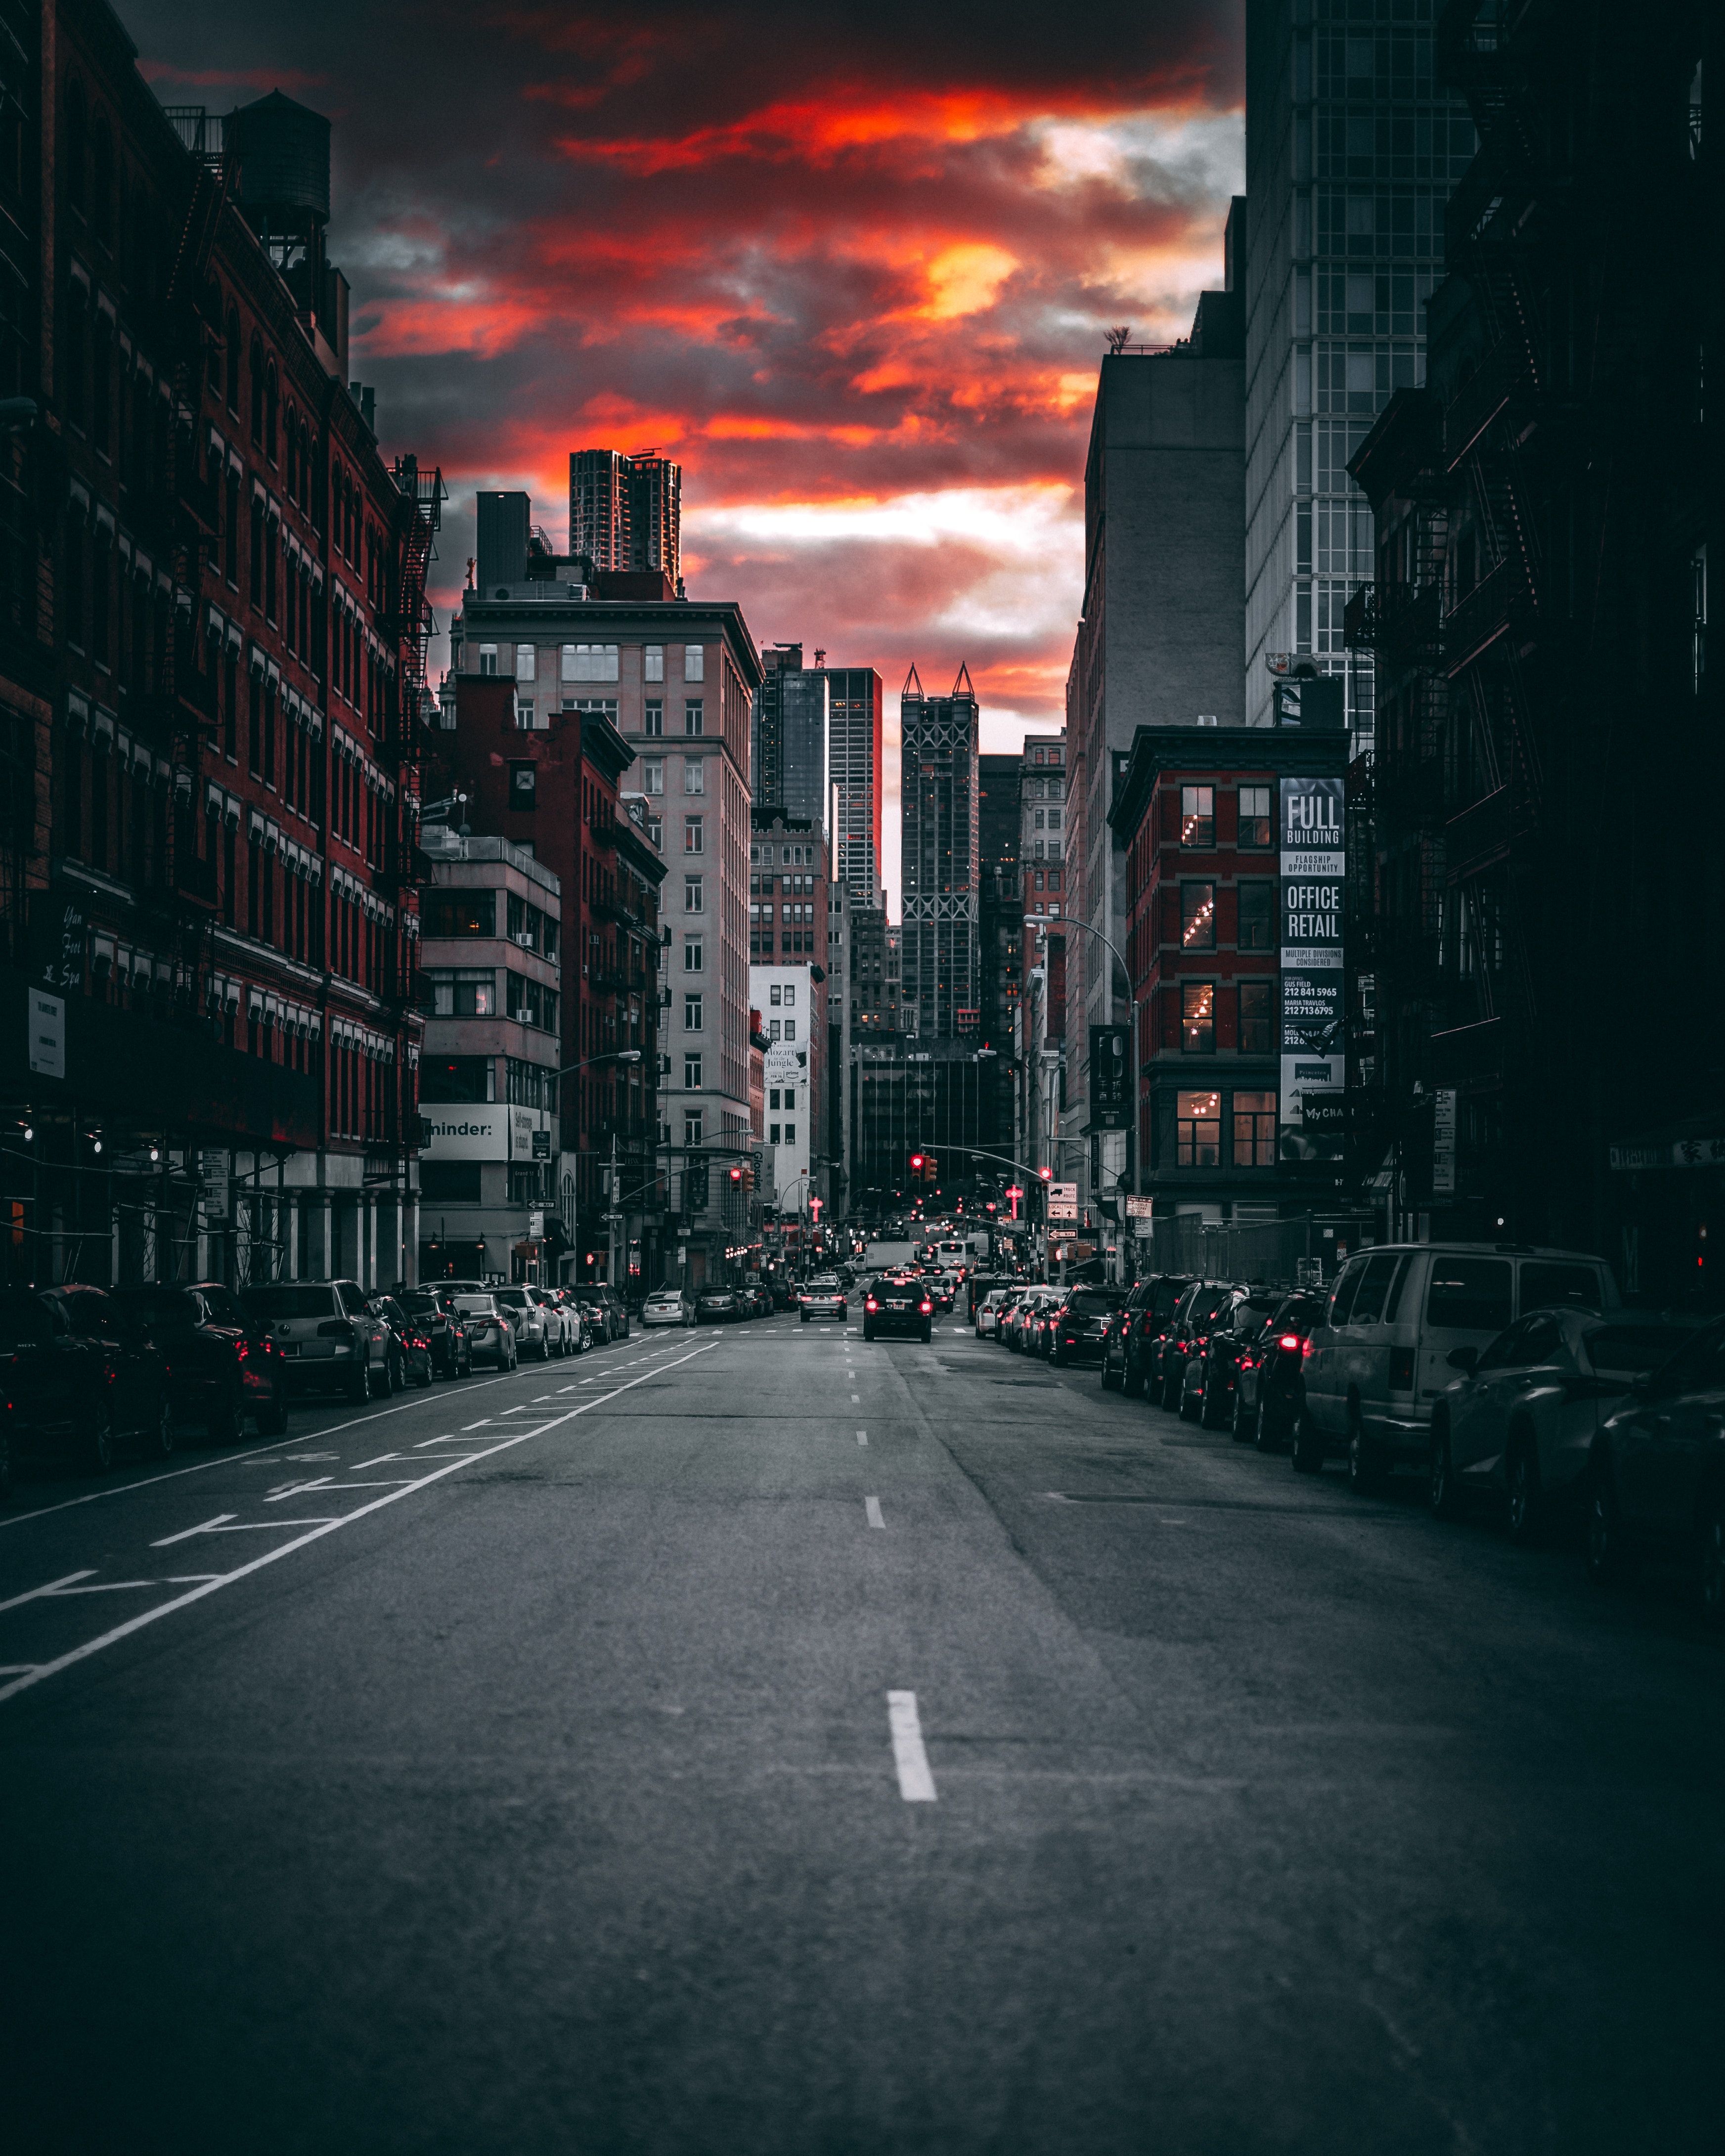 A city street at sunset with cars parked on the side of the road. - Cityscape